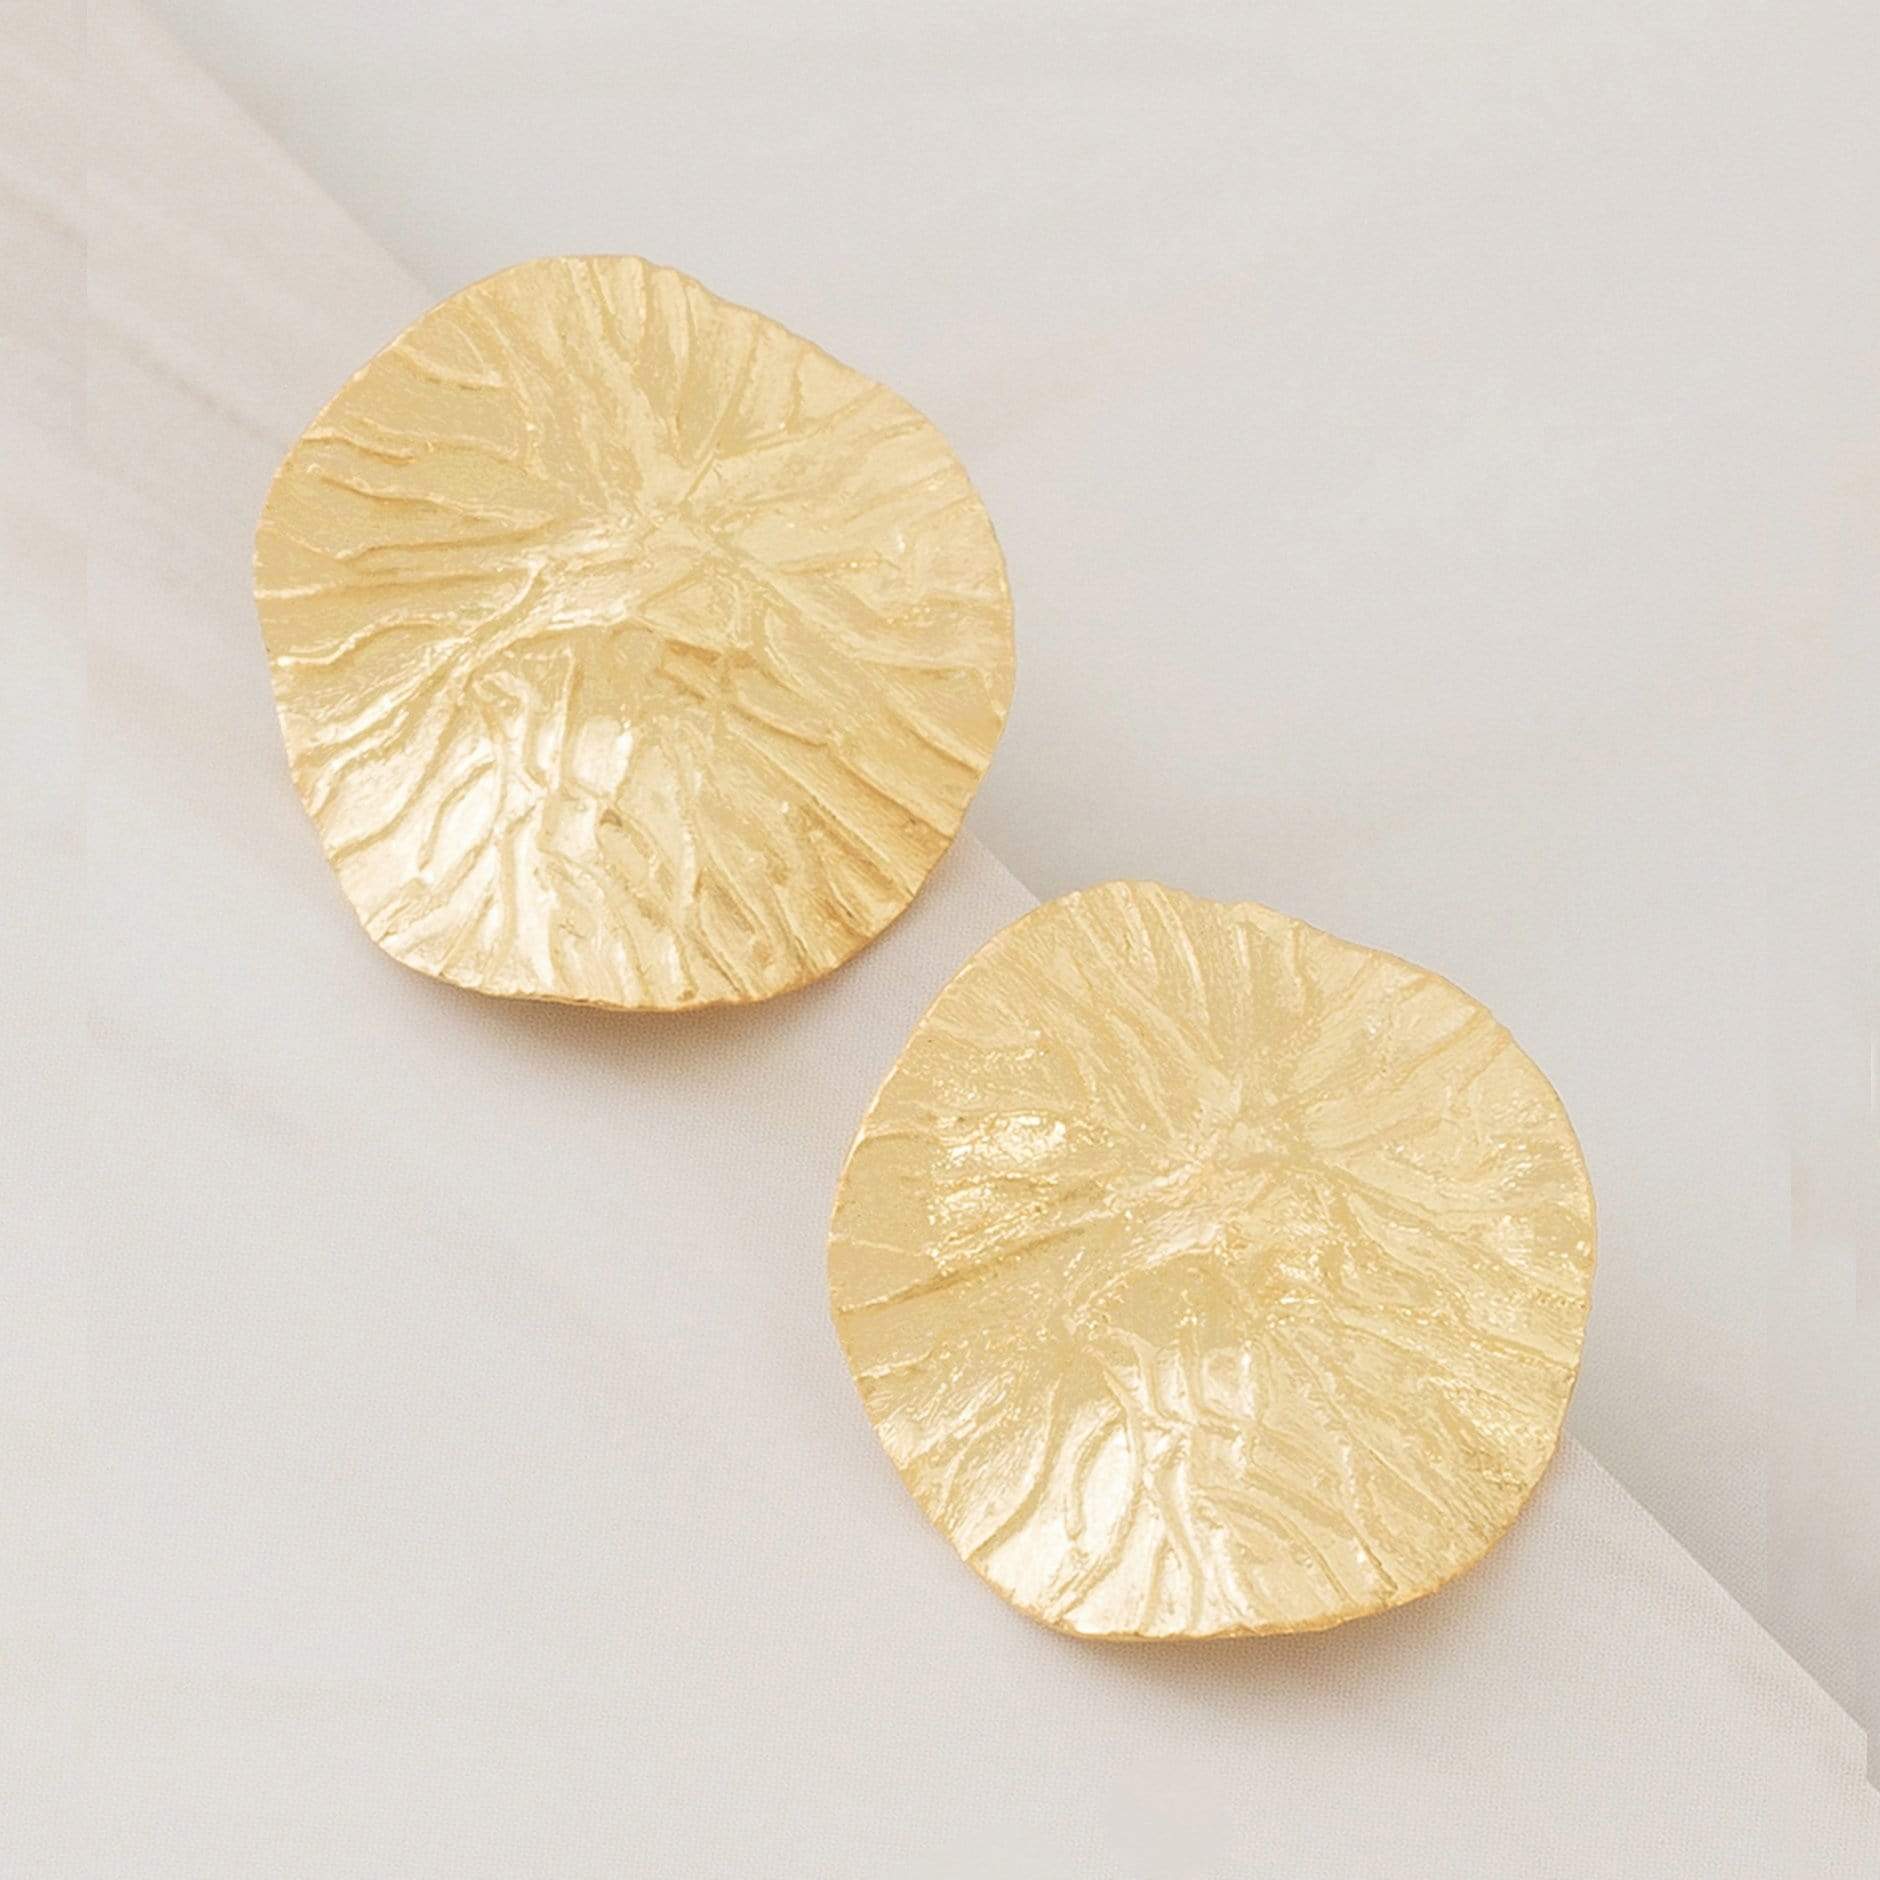 Emblem Jewelry Earrings Gold Tone Petite Lily Pad Disc Statement Earrings